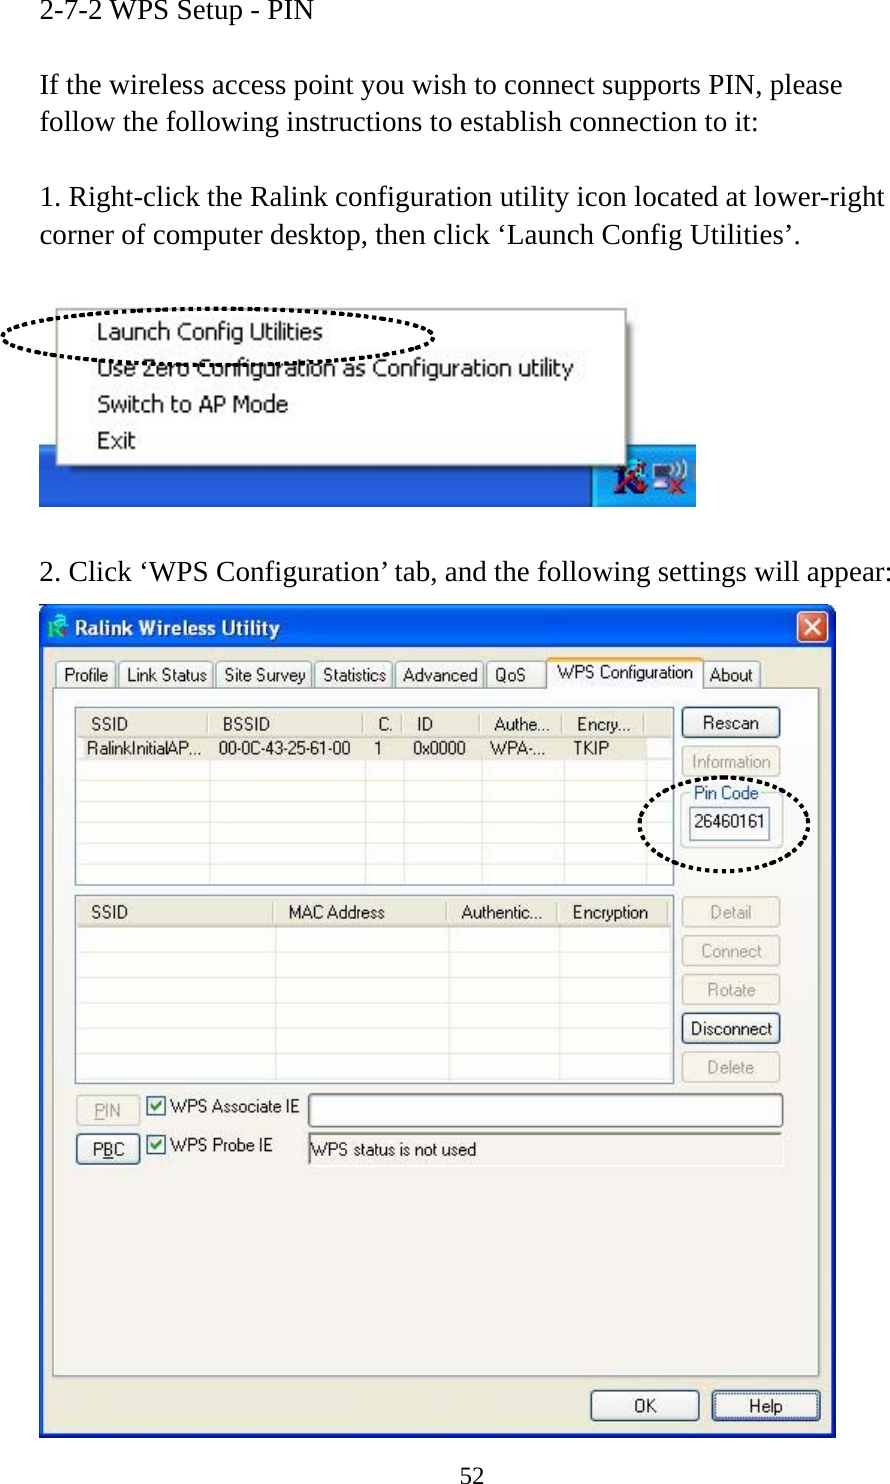  522-7-2 WPS Setup - PIN  If the wireless access point you wish to connect supports PIN, please follow the following instructions to establish connection to it:  1. Right-click the Ralink configuration utility icon located at lower-right corner of computer desktop, then click ‘Launch Config Utilities’.    2. Click ‘WPS Configuration’ tab, and the following settings will appear:  